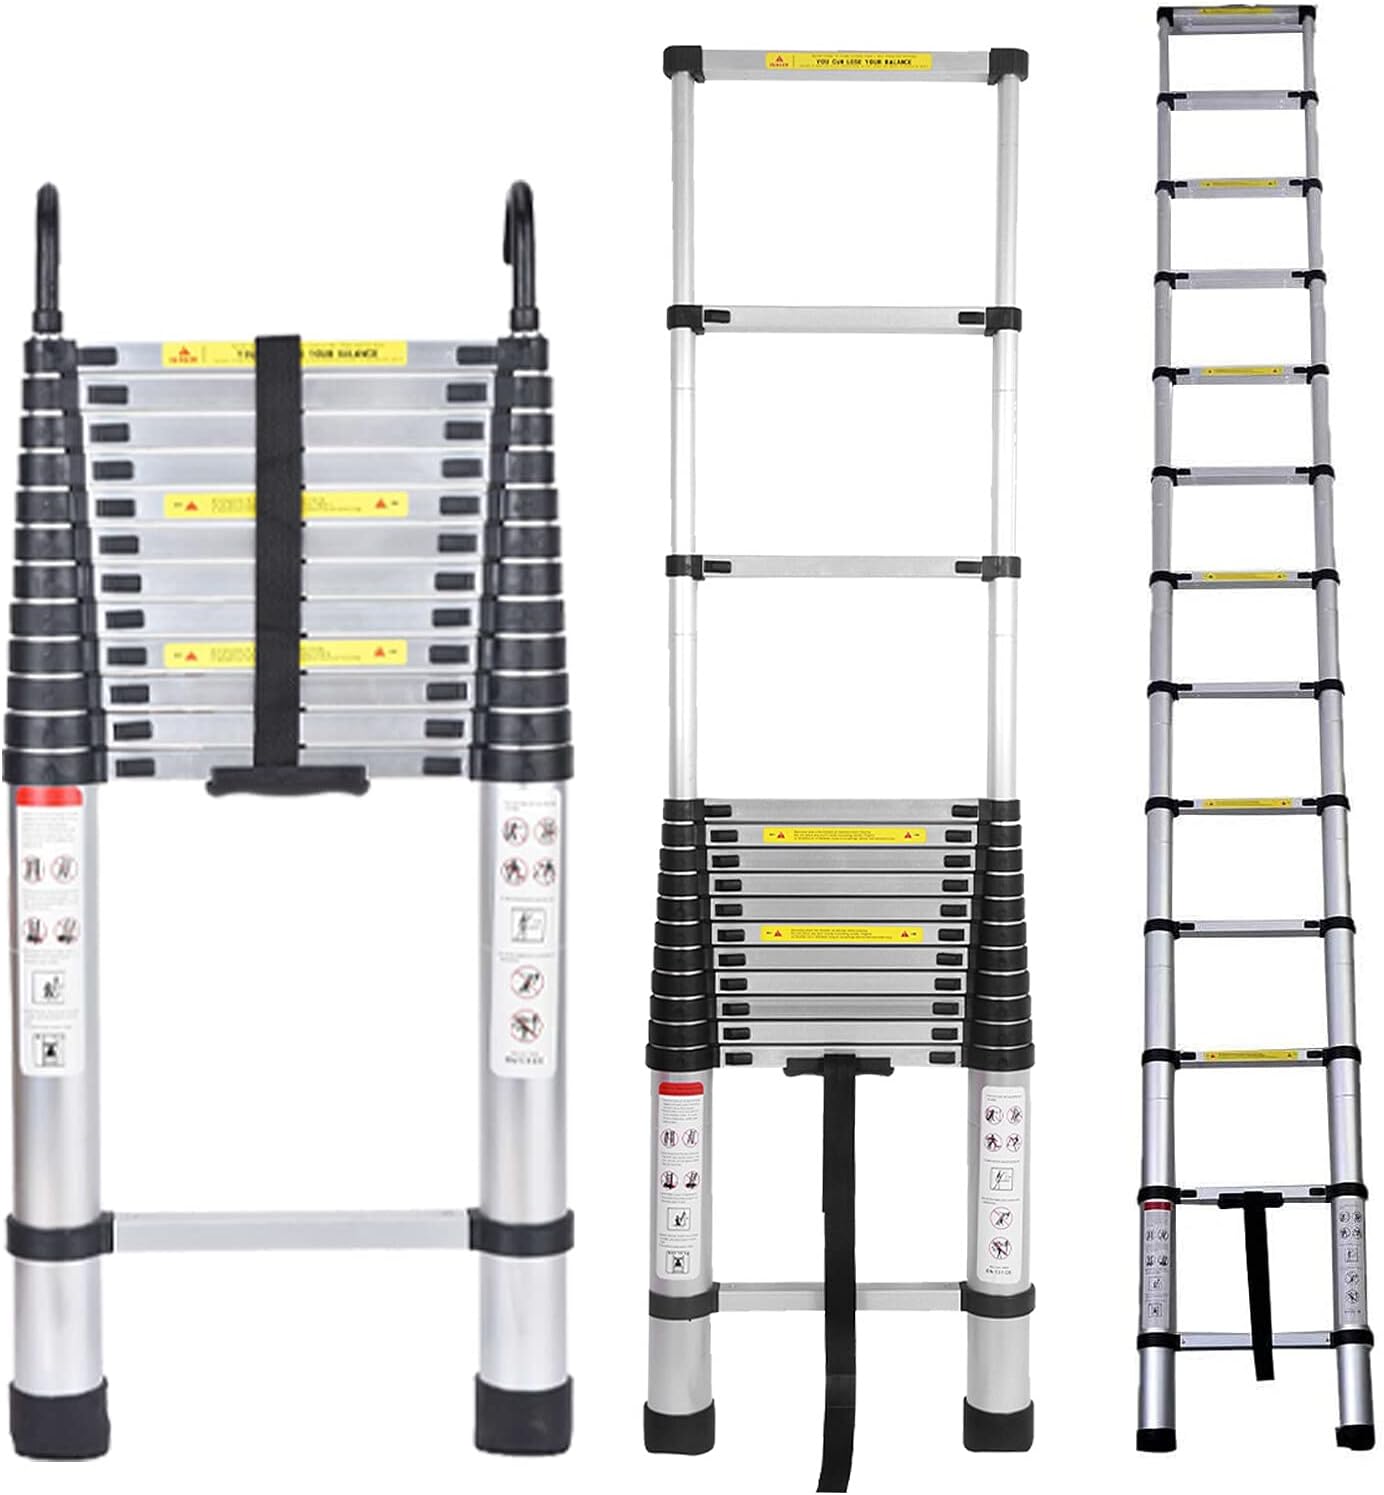 DICN Telescoping Ladder 16.5FT Extension Ladder Telescopic Ladder Loft Attic Collapsible Ladder with 2 Detachable Hooks Adjustable H